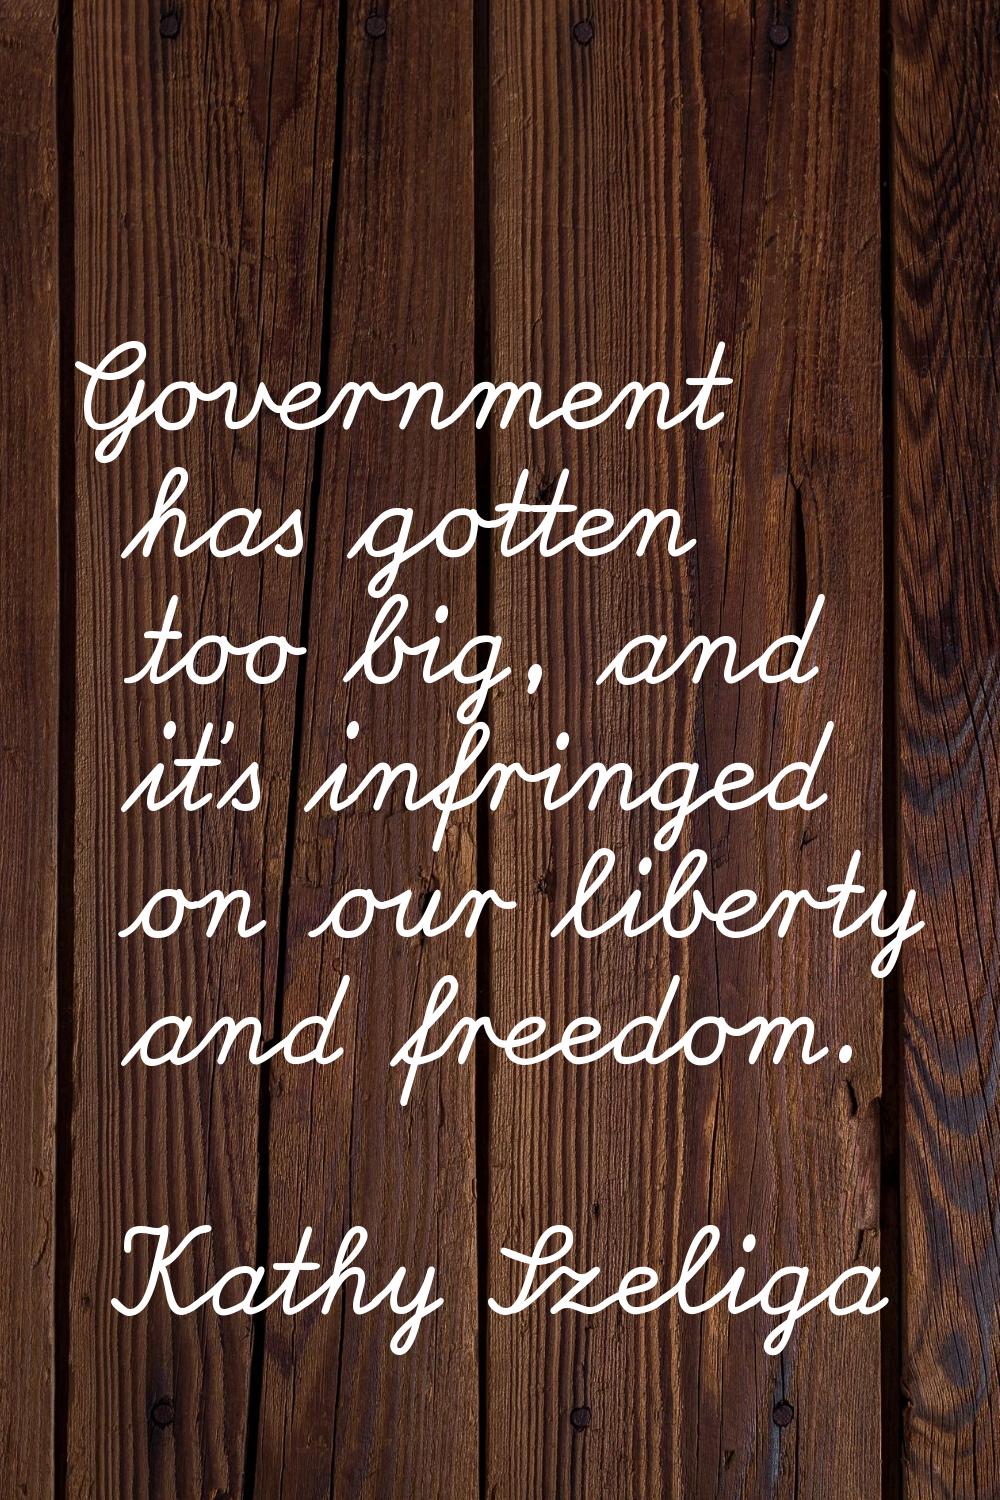 Government has gotten too big, and it's infringed on our liberty and freedom.